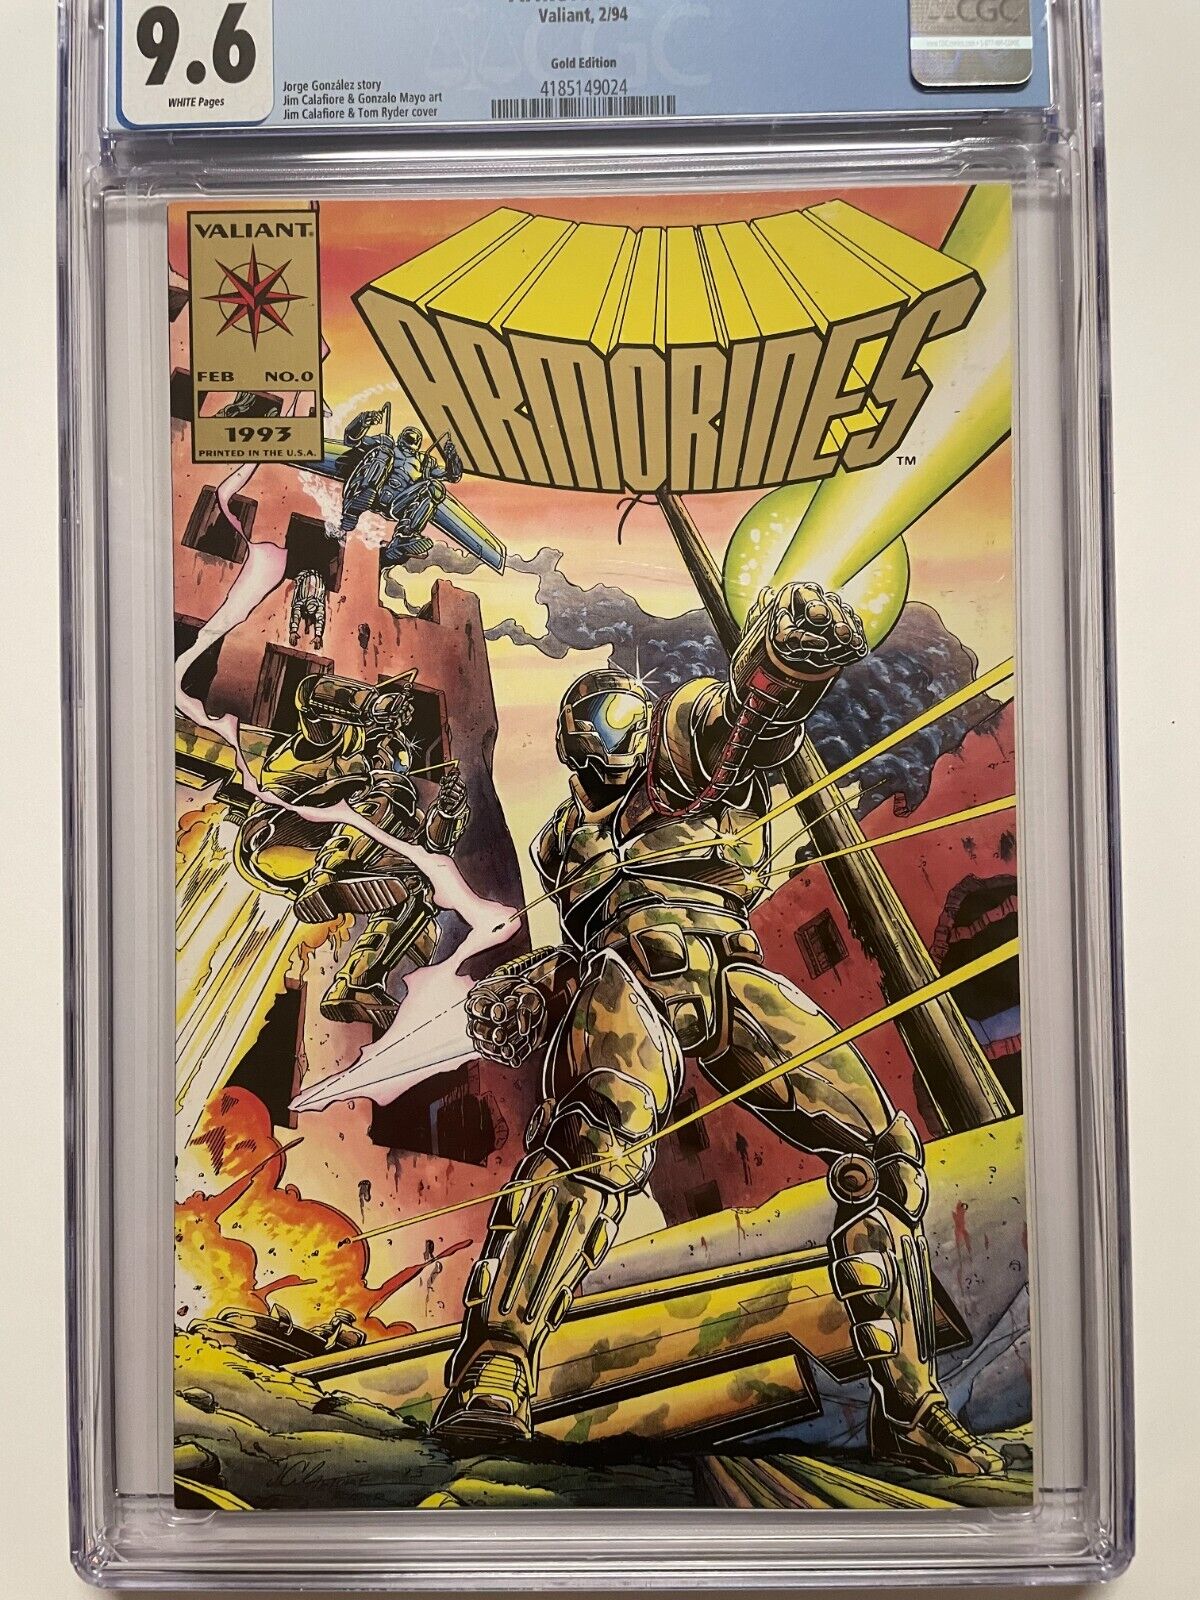 CGC 9.6  NM/MT ARMORINES #0 GOLD Edition Valiant incentive variant cover